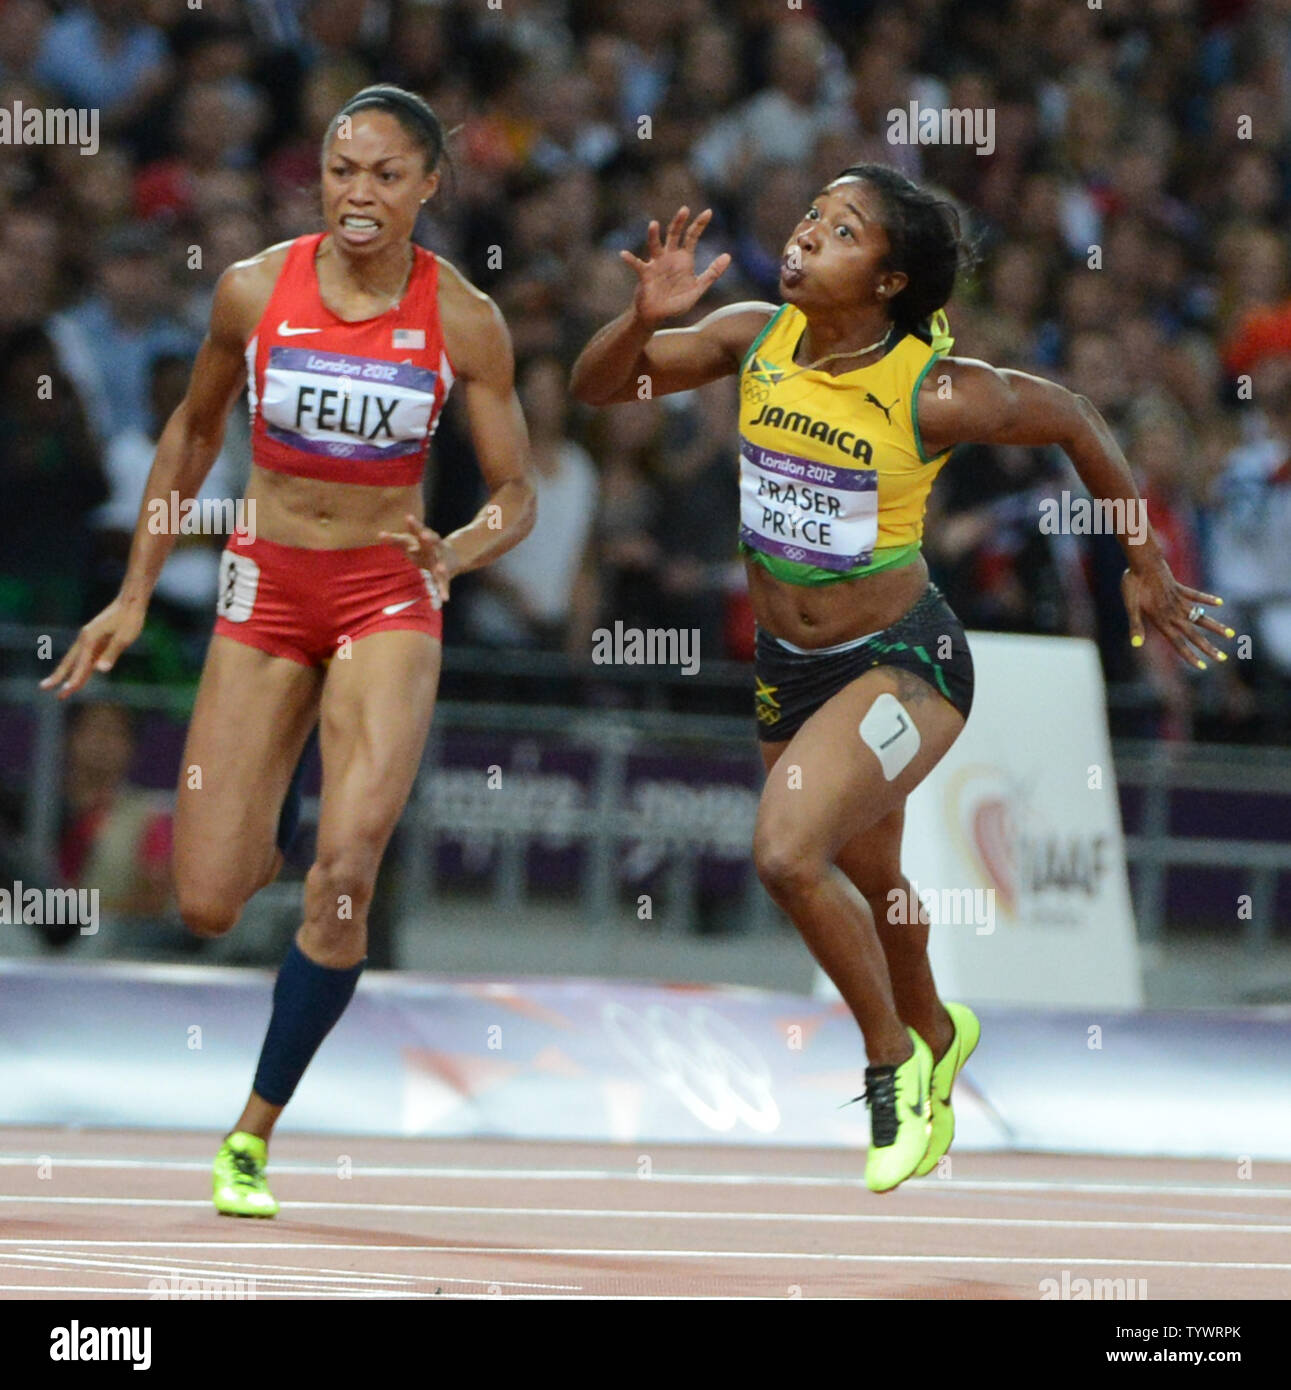 Shelly-Ann Fraser-Pryce of Jamaica (R) beats out Allyson Felix of the USA in the Women's 100M at the London 2012 Summer Olympics on August 3, 2012 in London.    UPI/Terry Schmitt Stock Photo